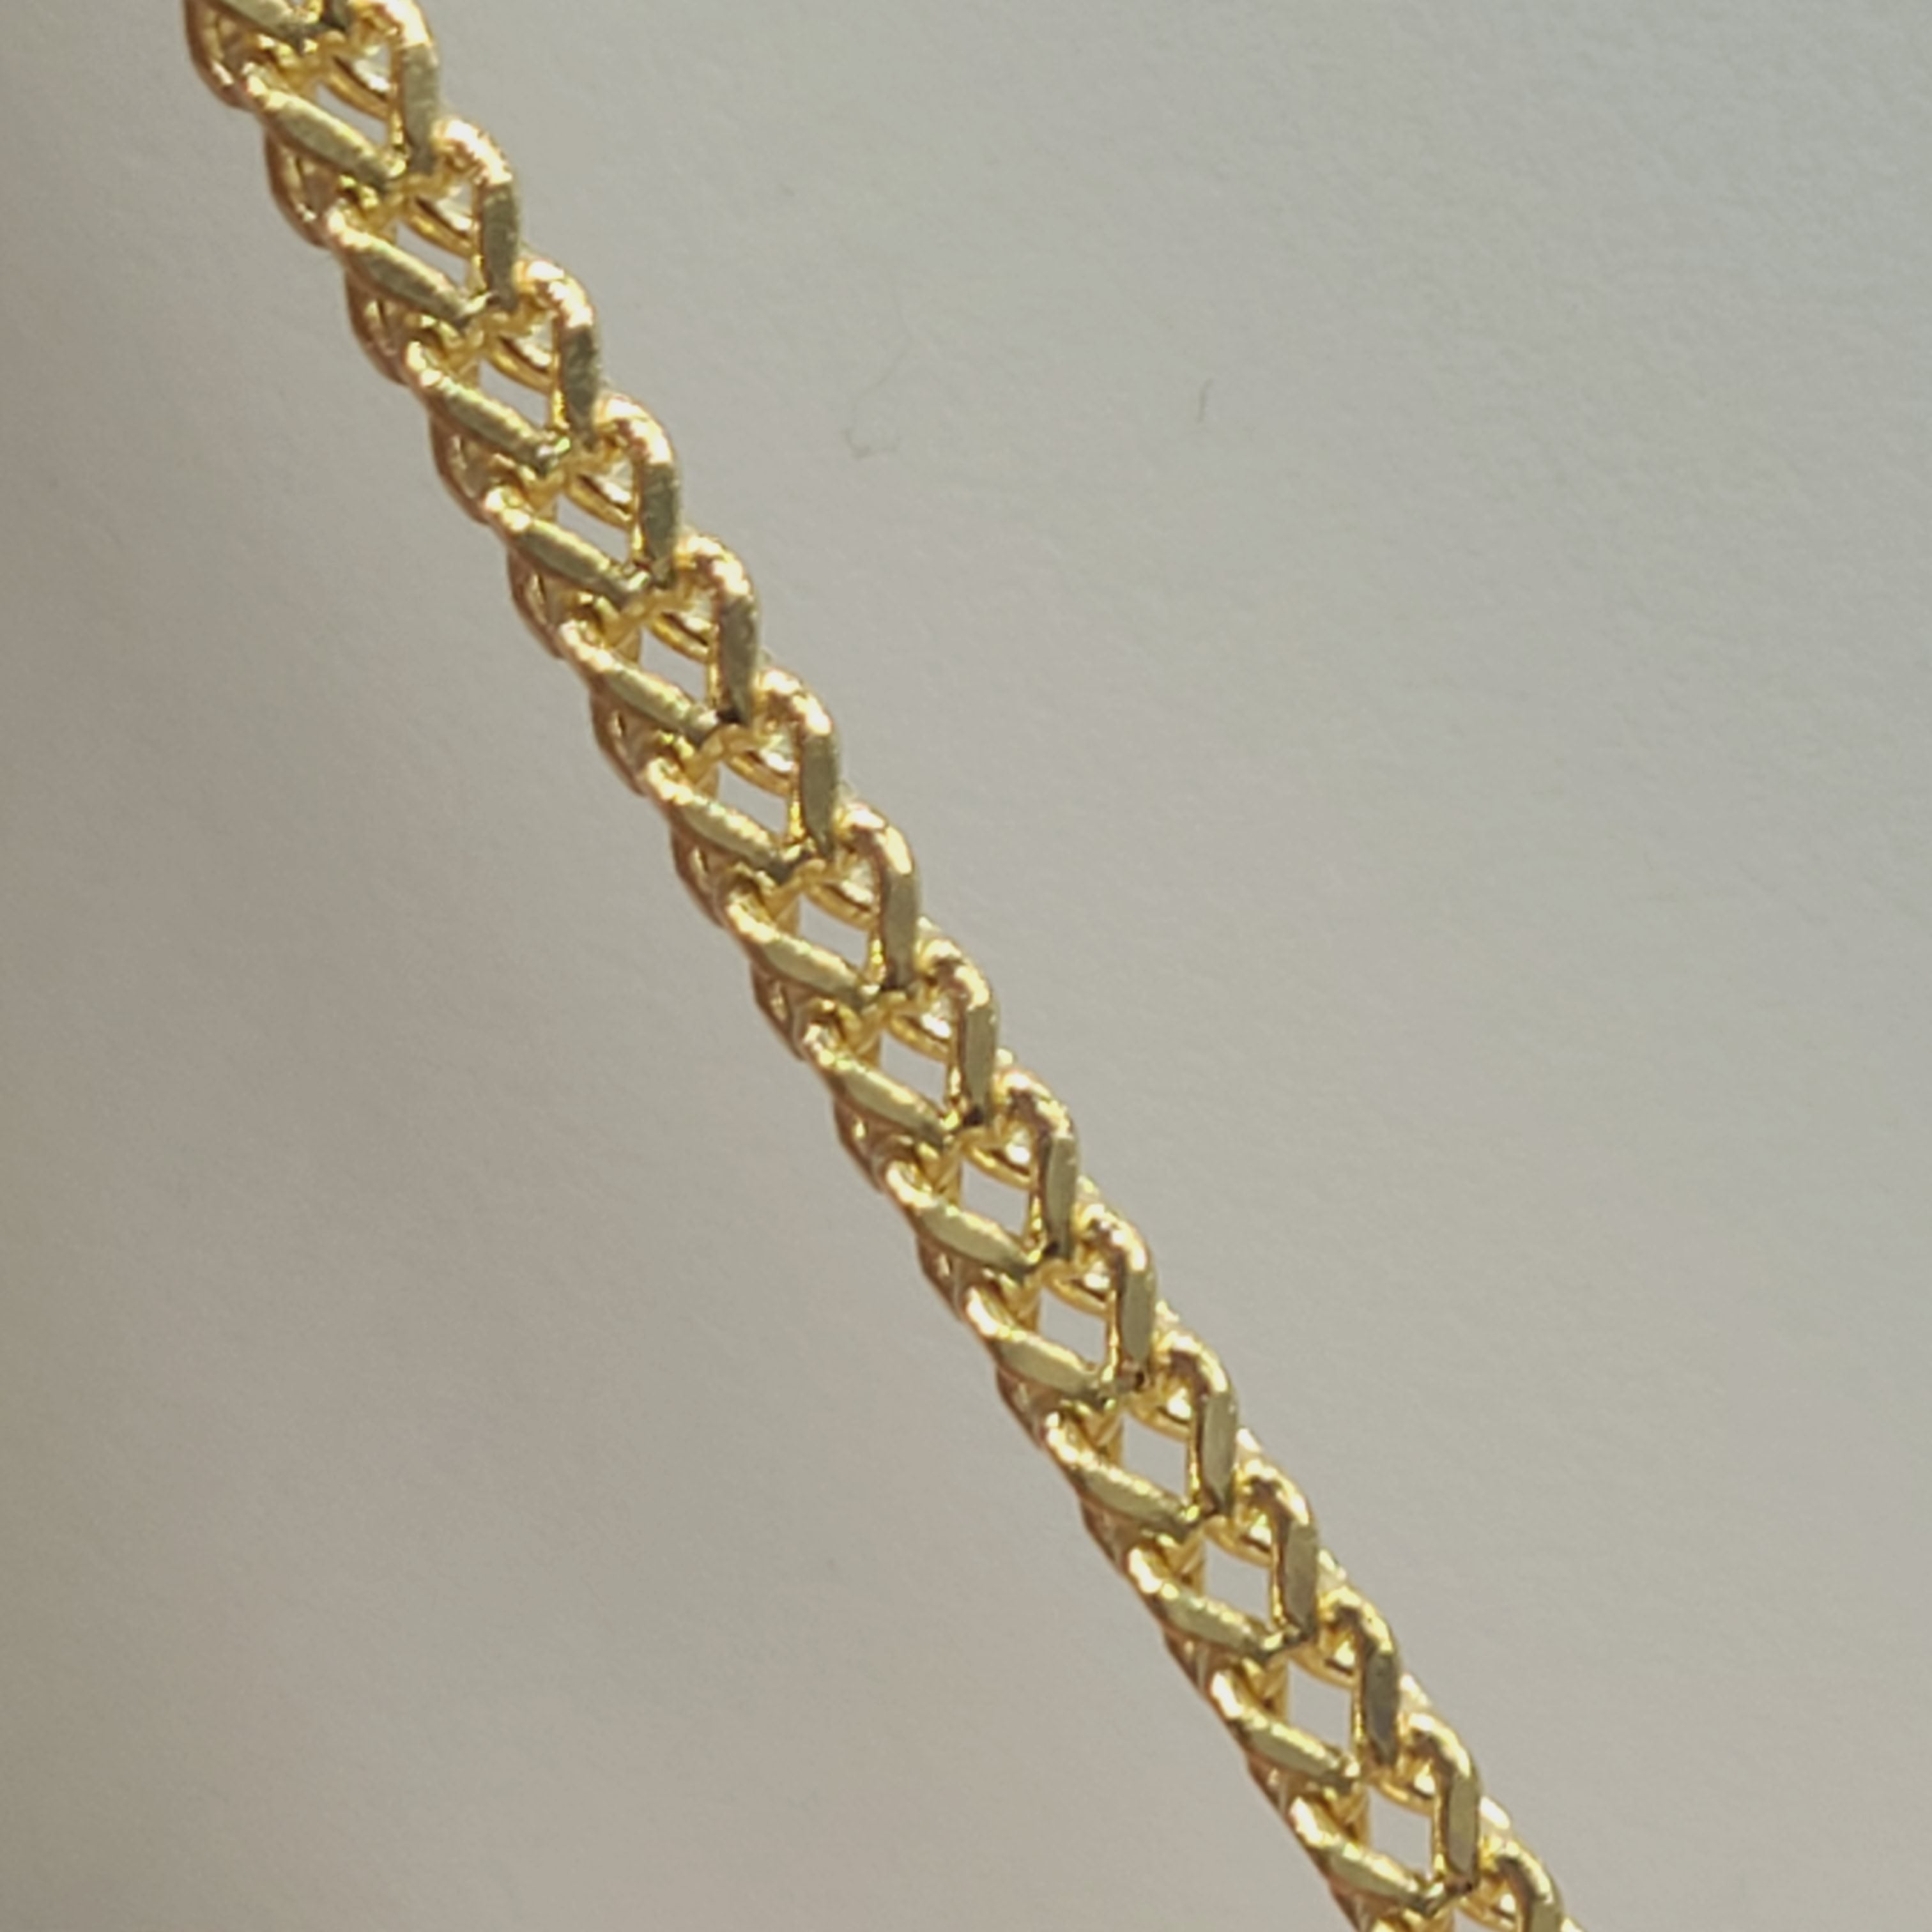 New! 24” 2.25mm 14K Yellow Gold Franco Link Box Chain Necklace 6.84g